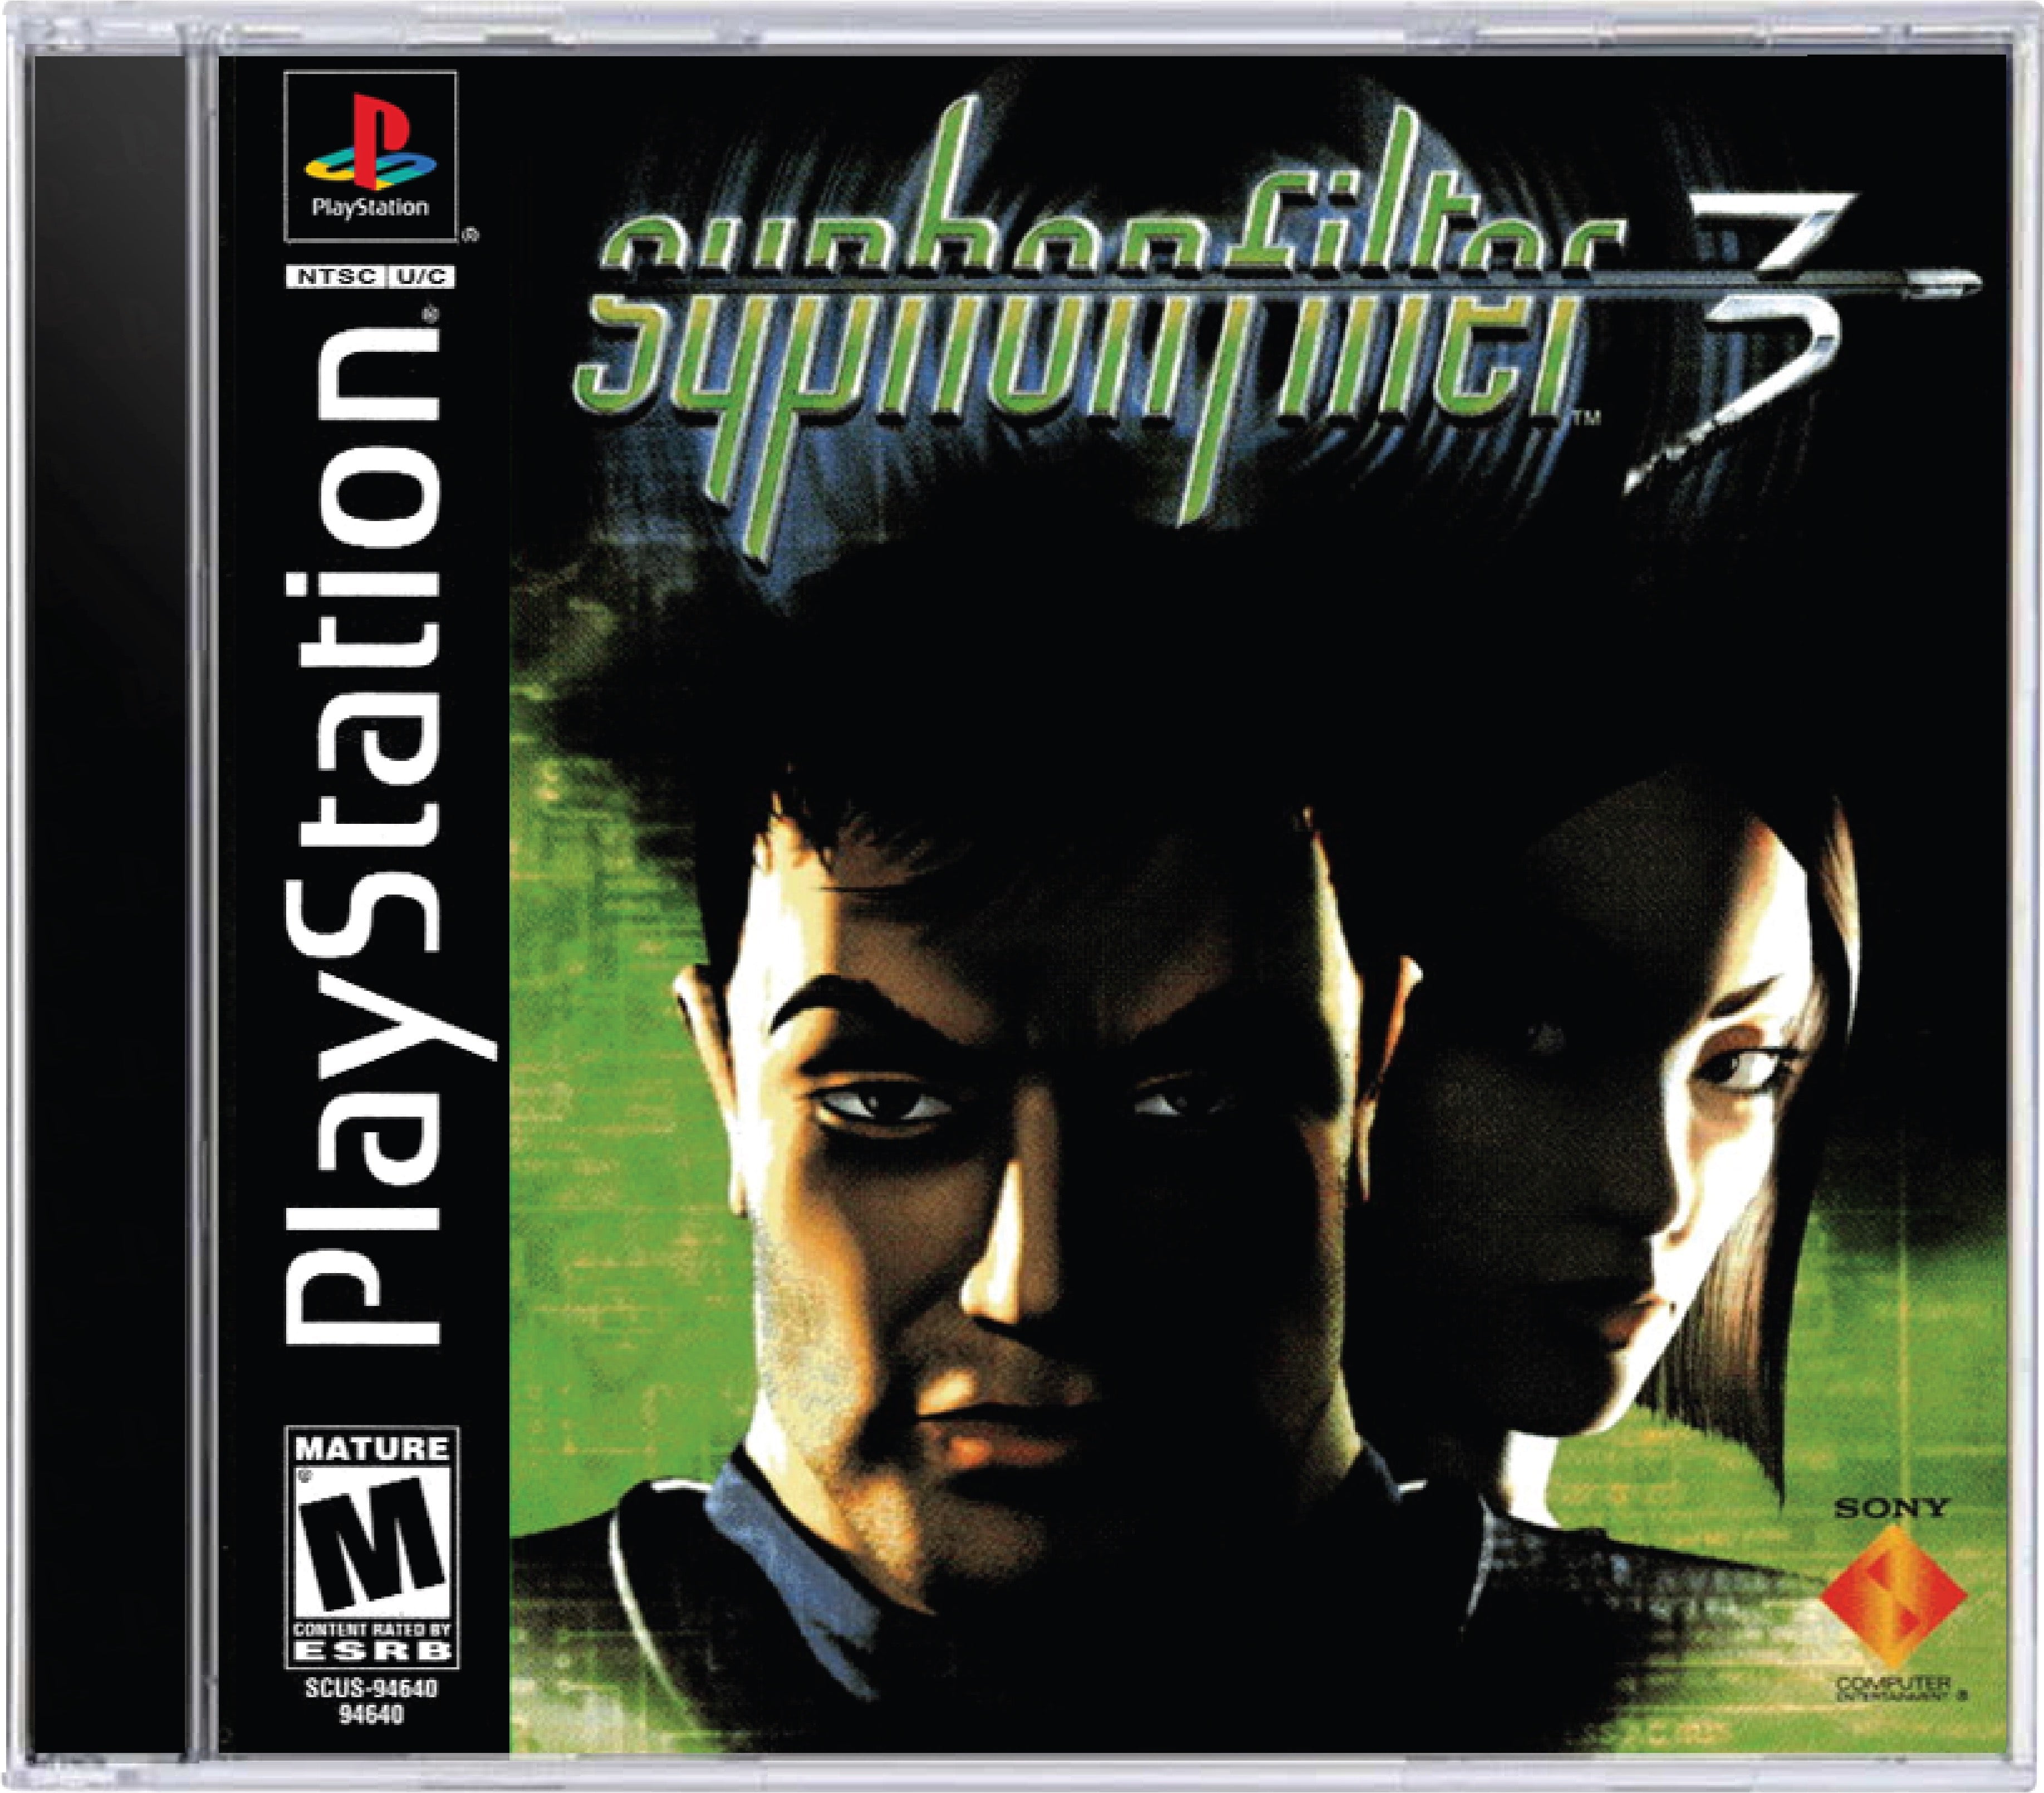 Syphon Filter 3 (9/11) - PS1 Long Box Cover by RaidenRaider on DeviantArt